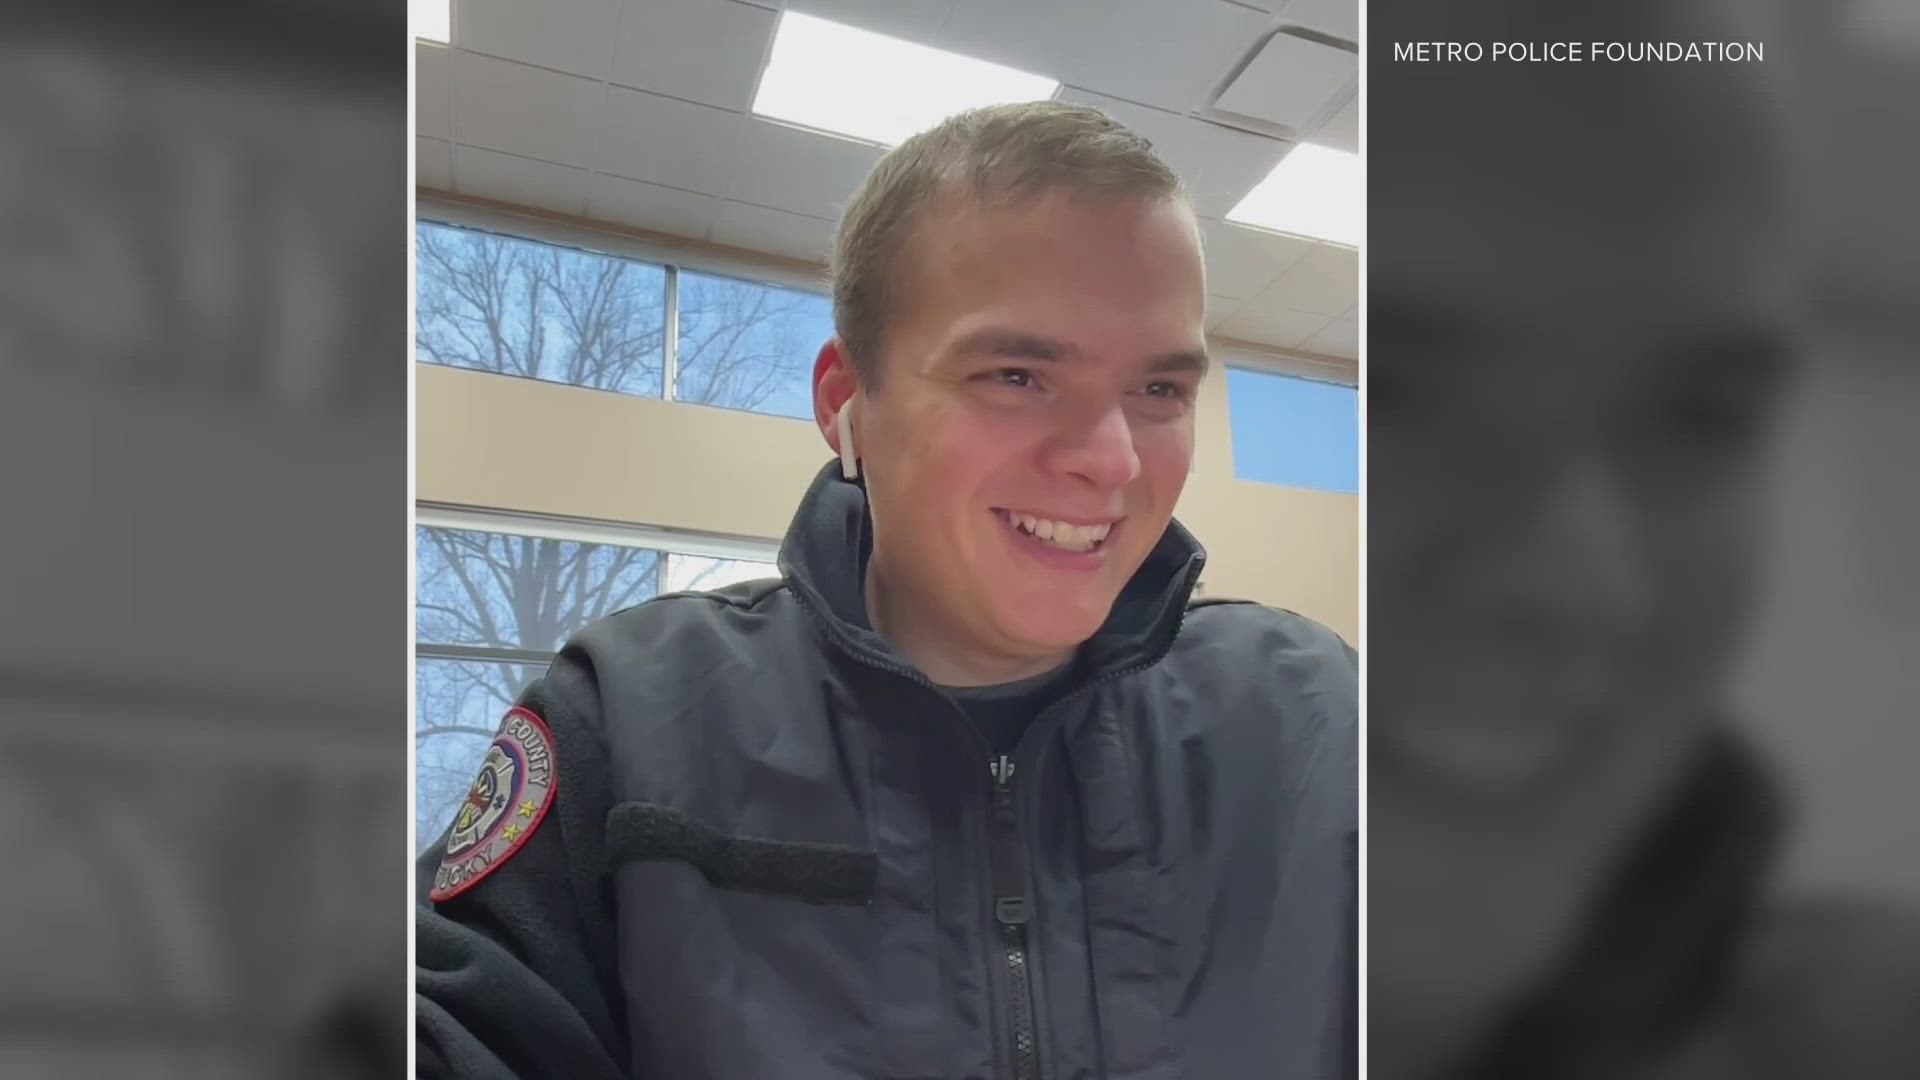 A benefit concert was thrown for Officer Nickolas Wilt, who was shot in the head and seriously injured while responding to a mass shooting in Louisville.